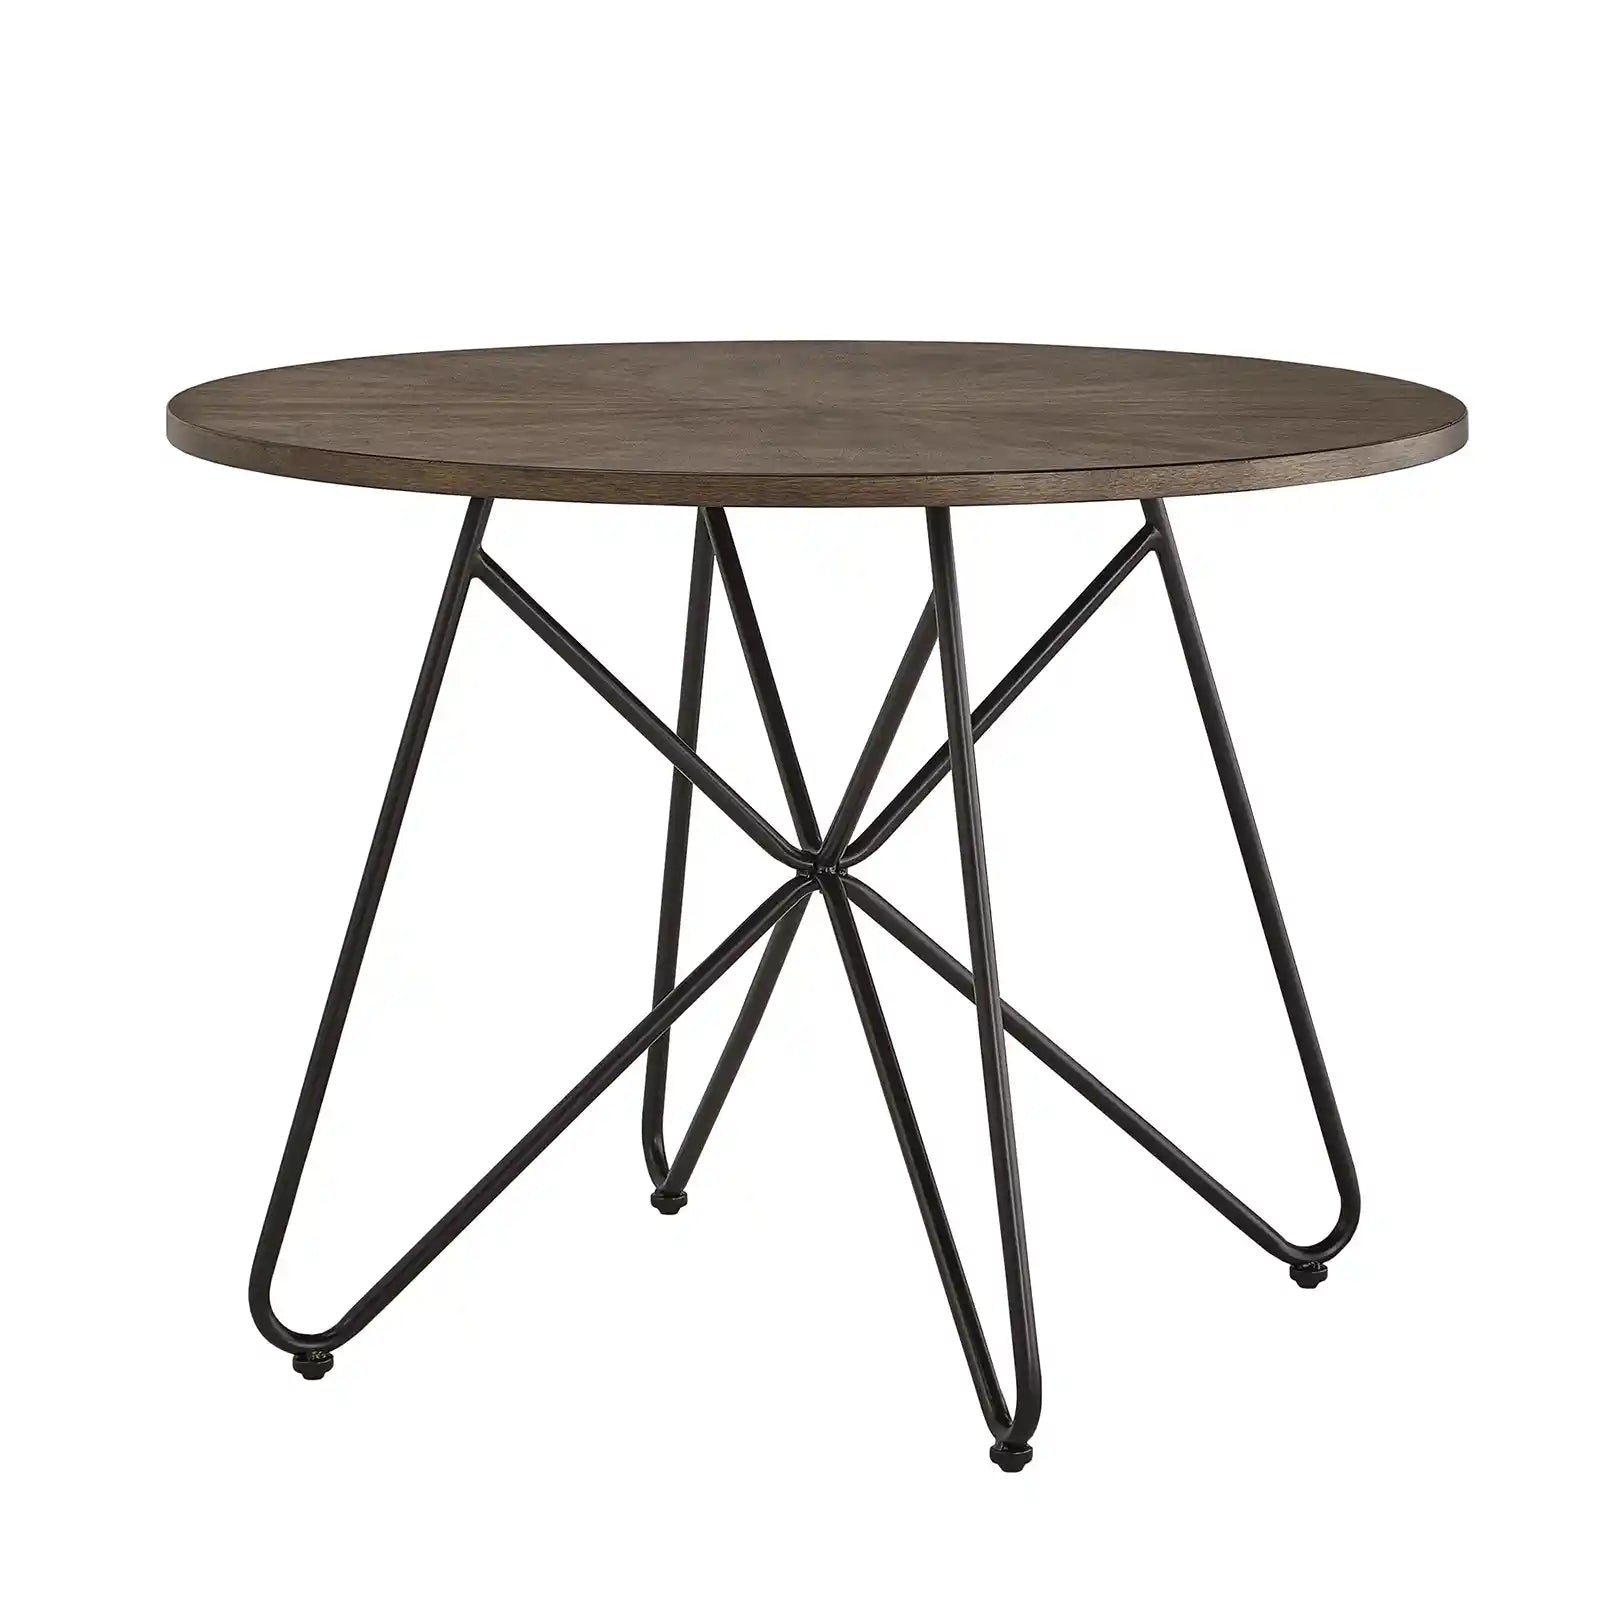 Wood 42 inch Round Dining Table with Black Iron Legs, Walnut Finish